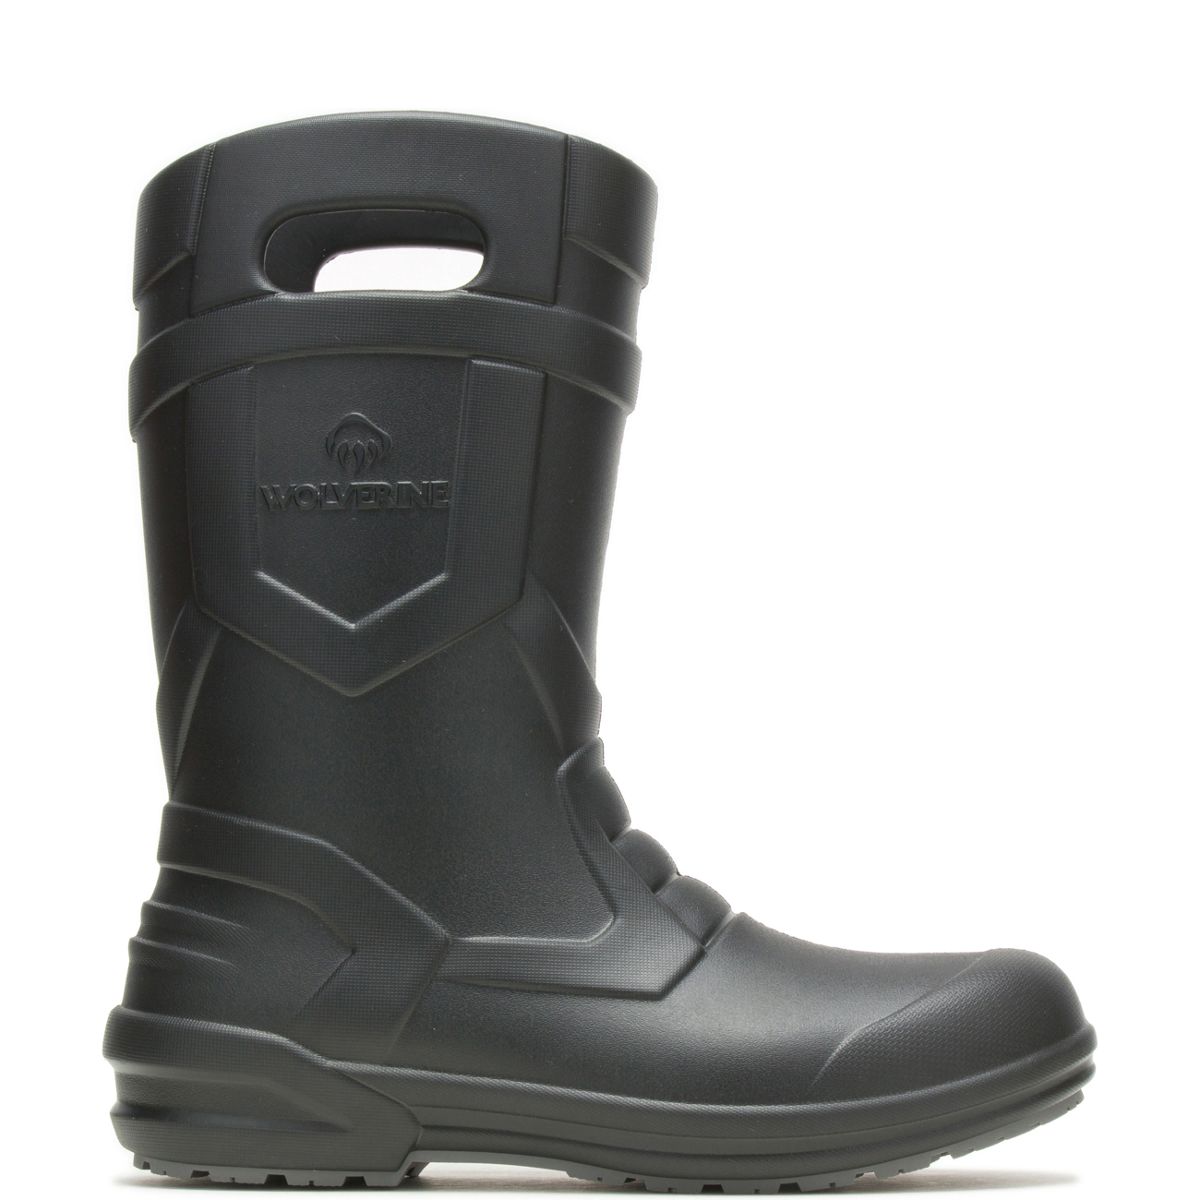 Wolverine Men’s Scout Wellington injected rubber boot $23.99+tax w/coupon FS